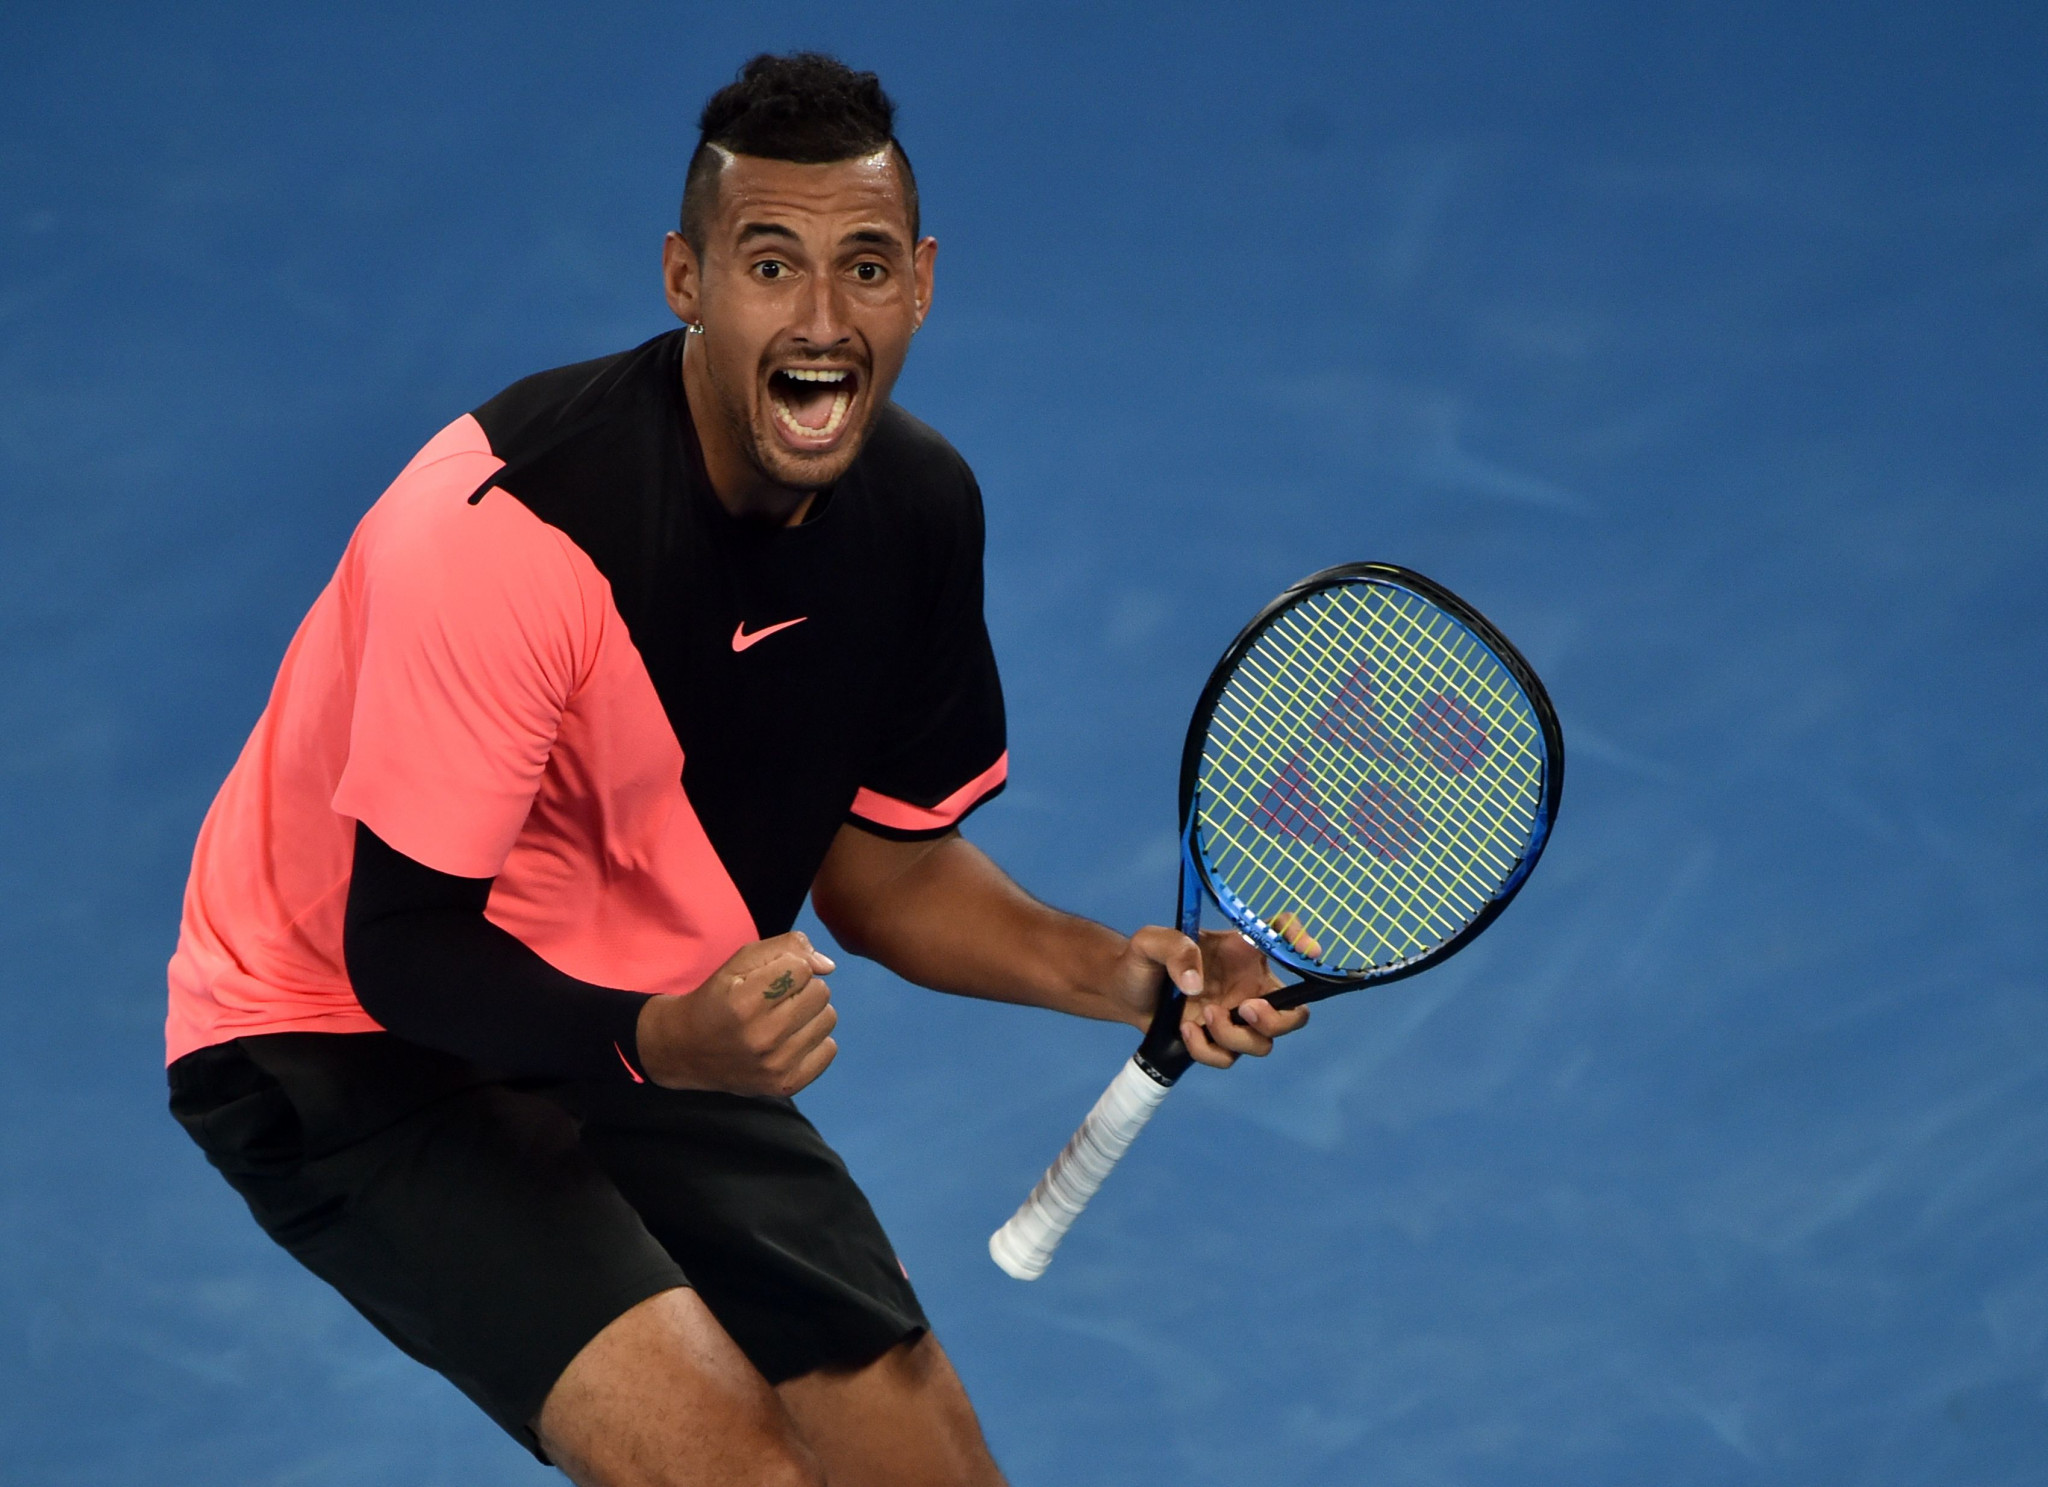 Kyrgios wins on day of extreme heat at Australian Open